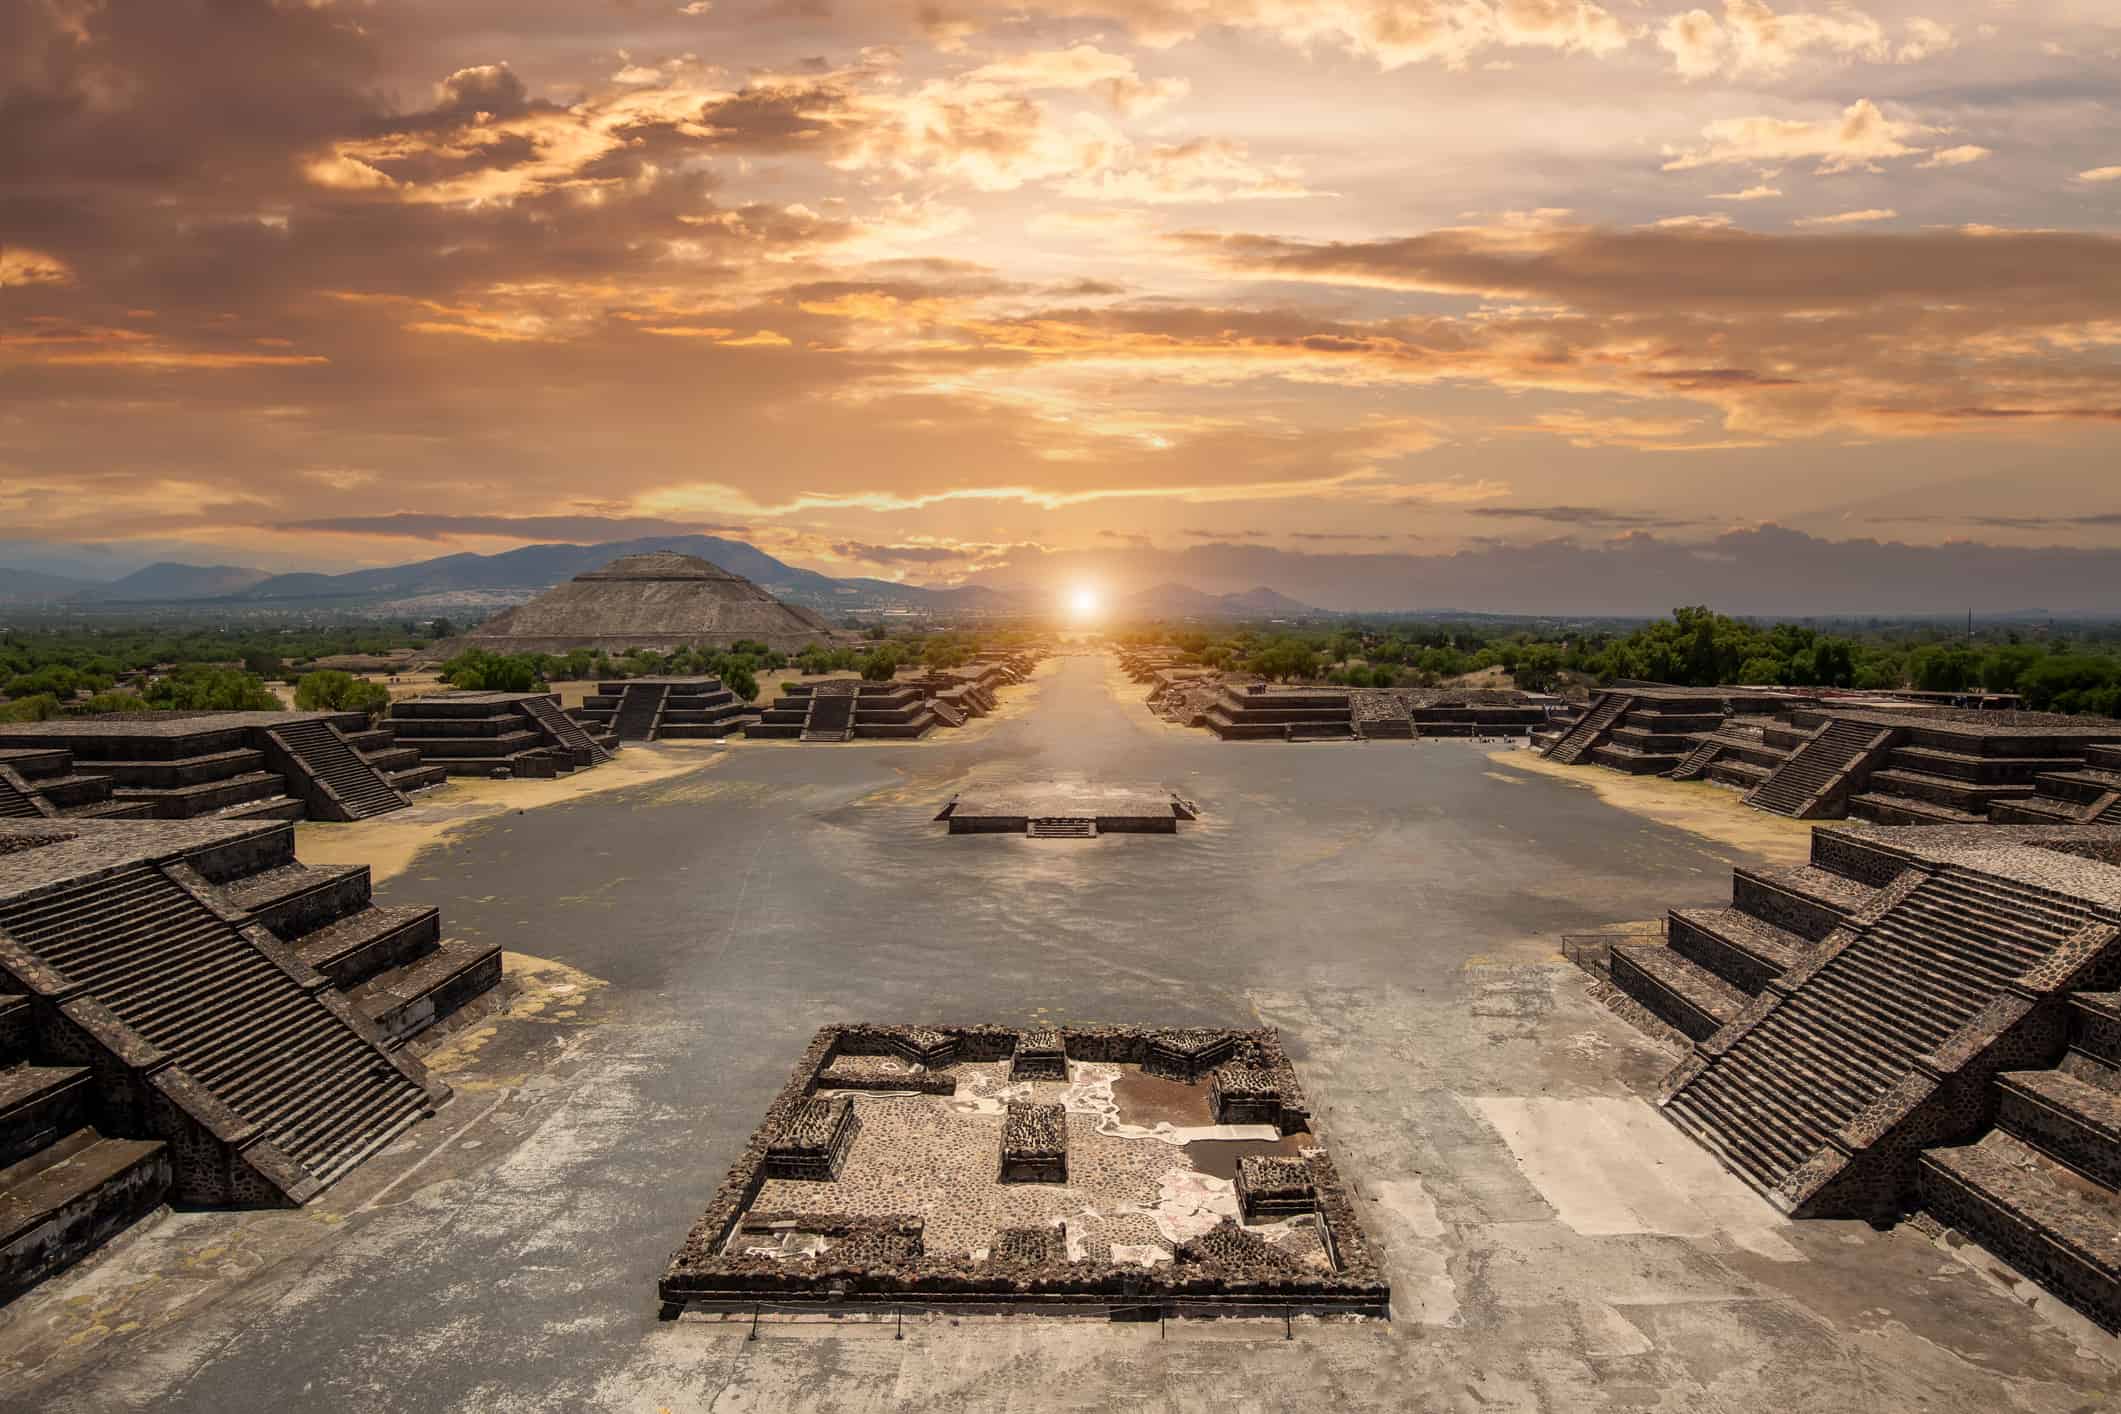 <p>Built around 200 to 450 C.E., the Pyramid of the Moon is located in the ancient city of Teotihuacan. Teotihuacan has many pyramids in its city and sometimes pyramids were built on top of each other. It is believed that the Toltecs or the Teotihuacanos built the pyramid, but the Aztecs discovered it long after it was abandoned and in ruins. The Pyramid of the Moon was built for the goddesses the Toltecs or the Teotihuacanos believed in. It is the second-largest pyramid in Latin America.</p>